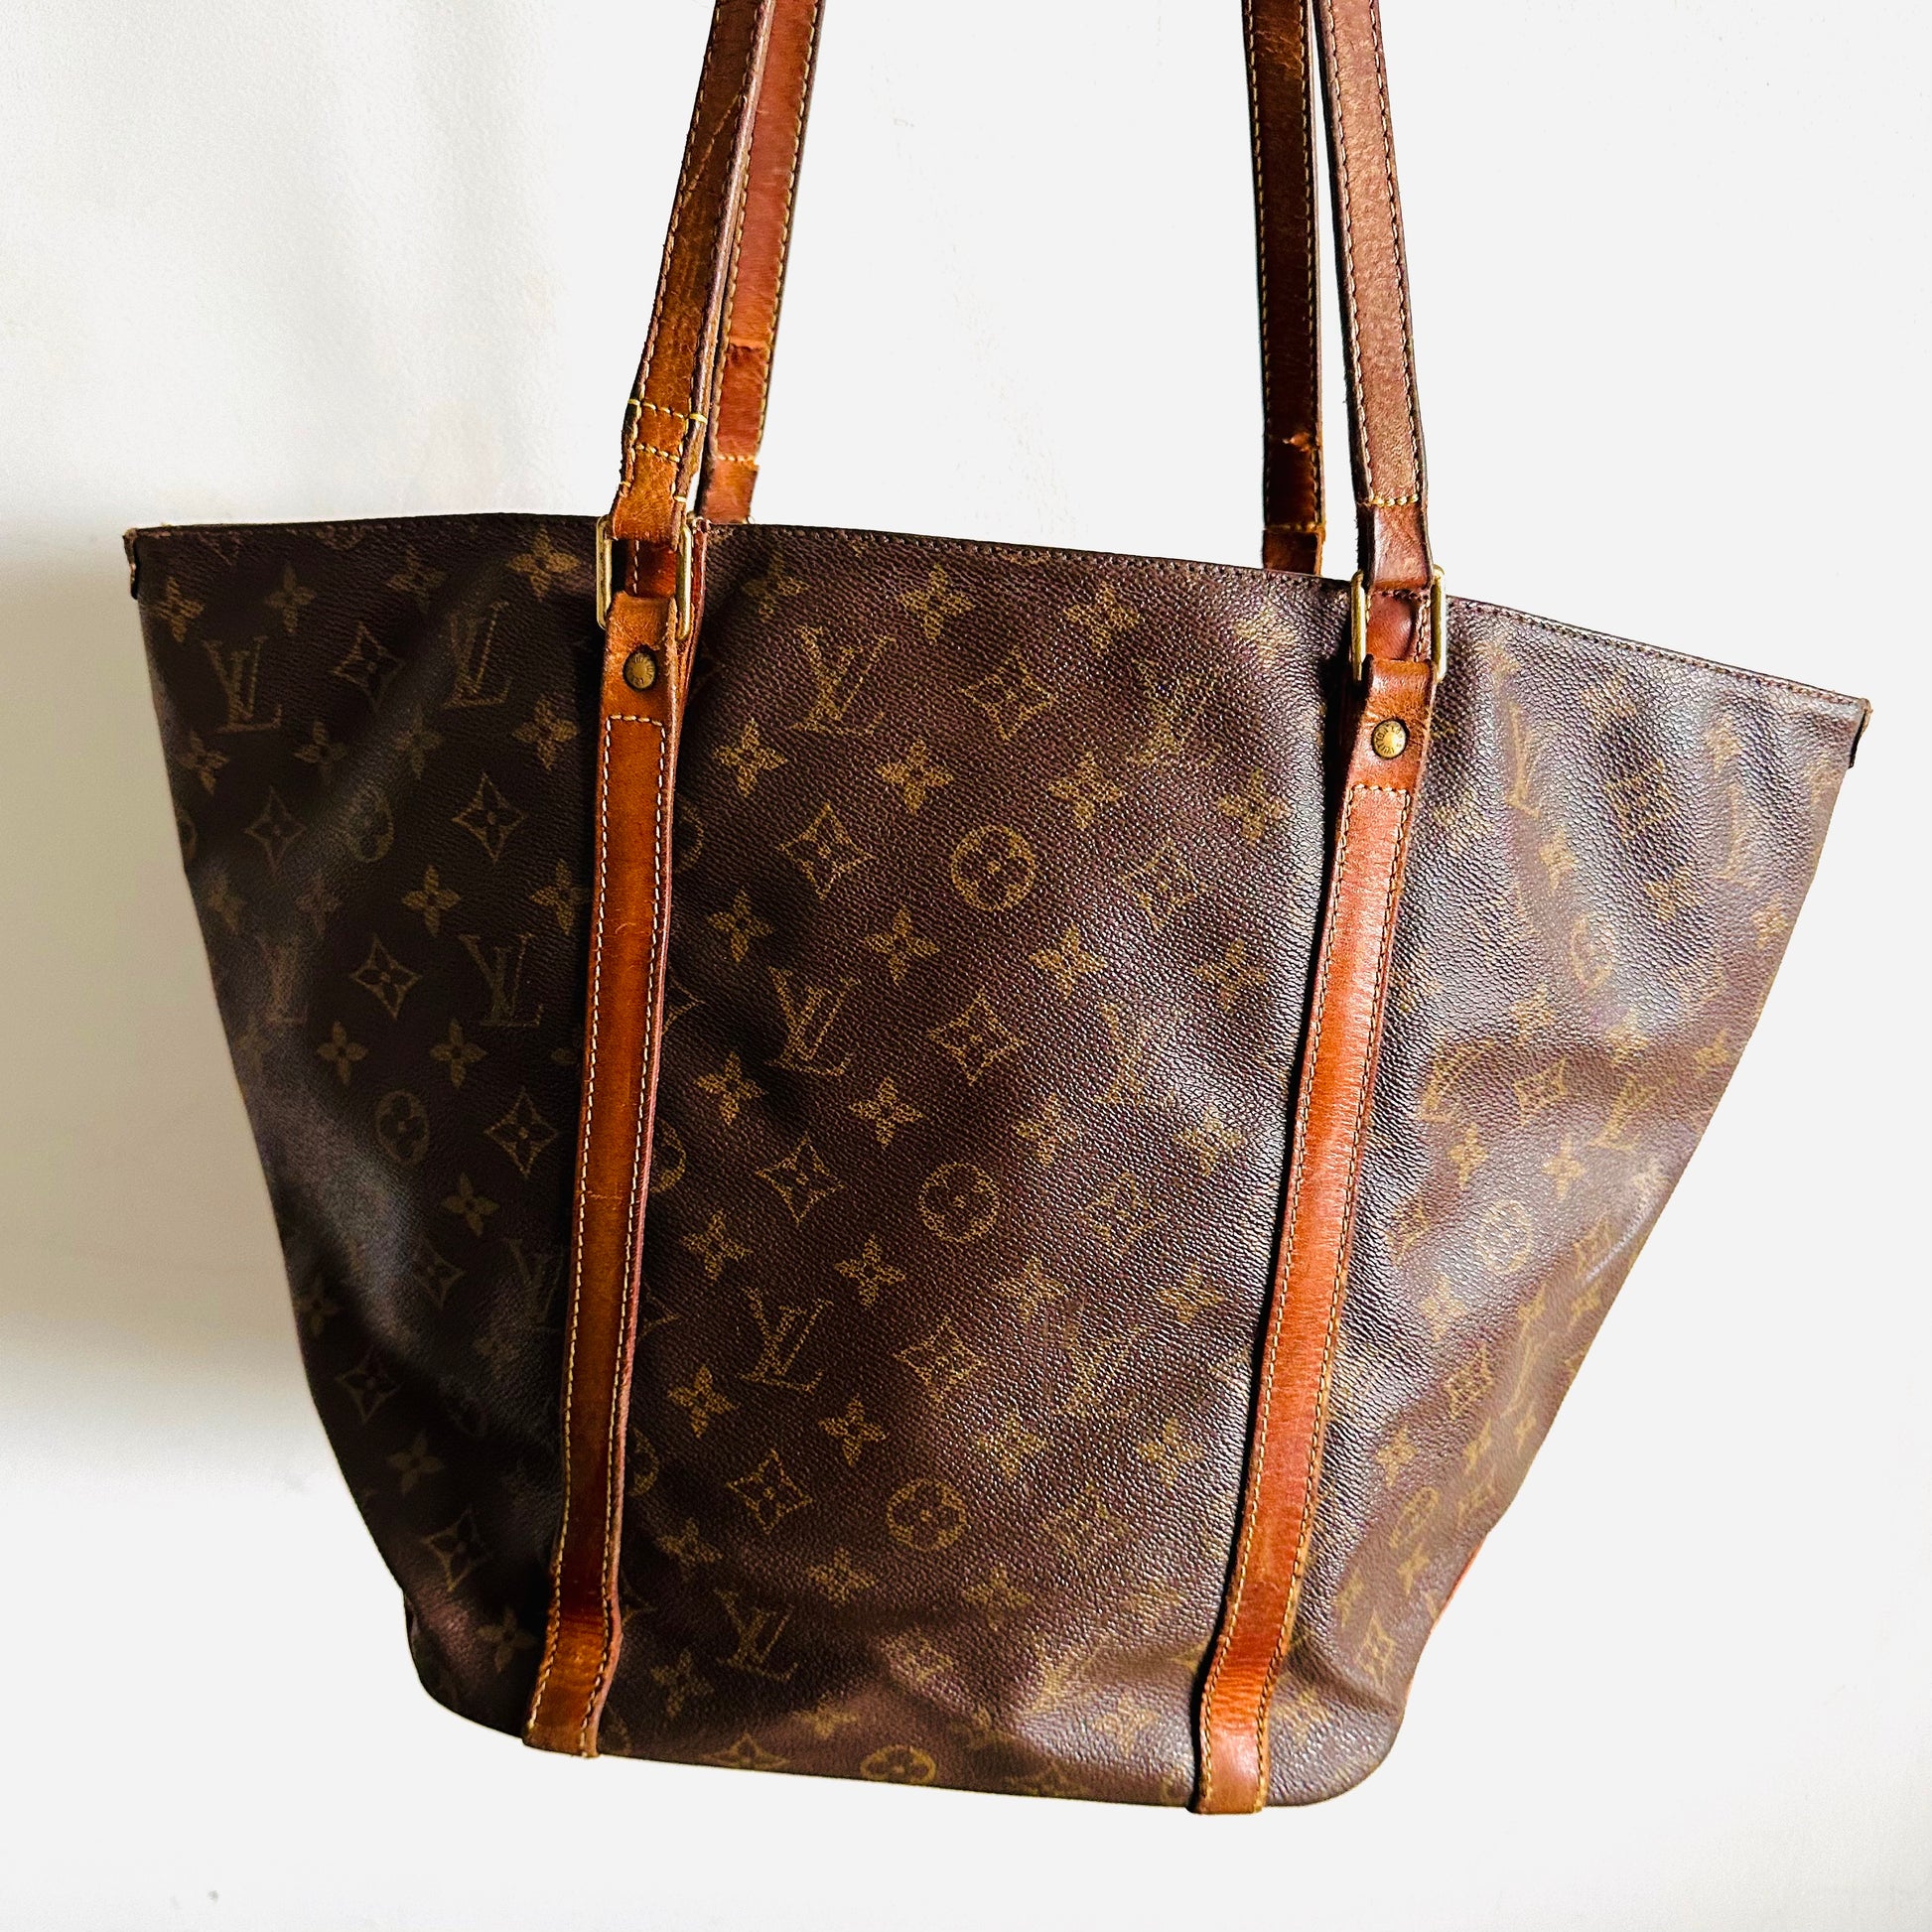 Louis Vuitton Monogram Sac Shopping Tote M51110 Authenticity Certified